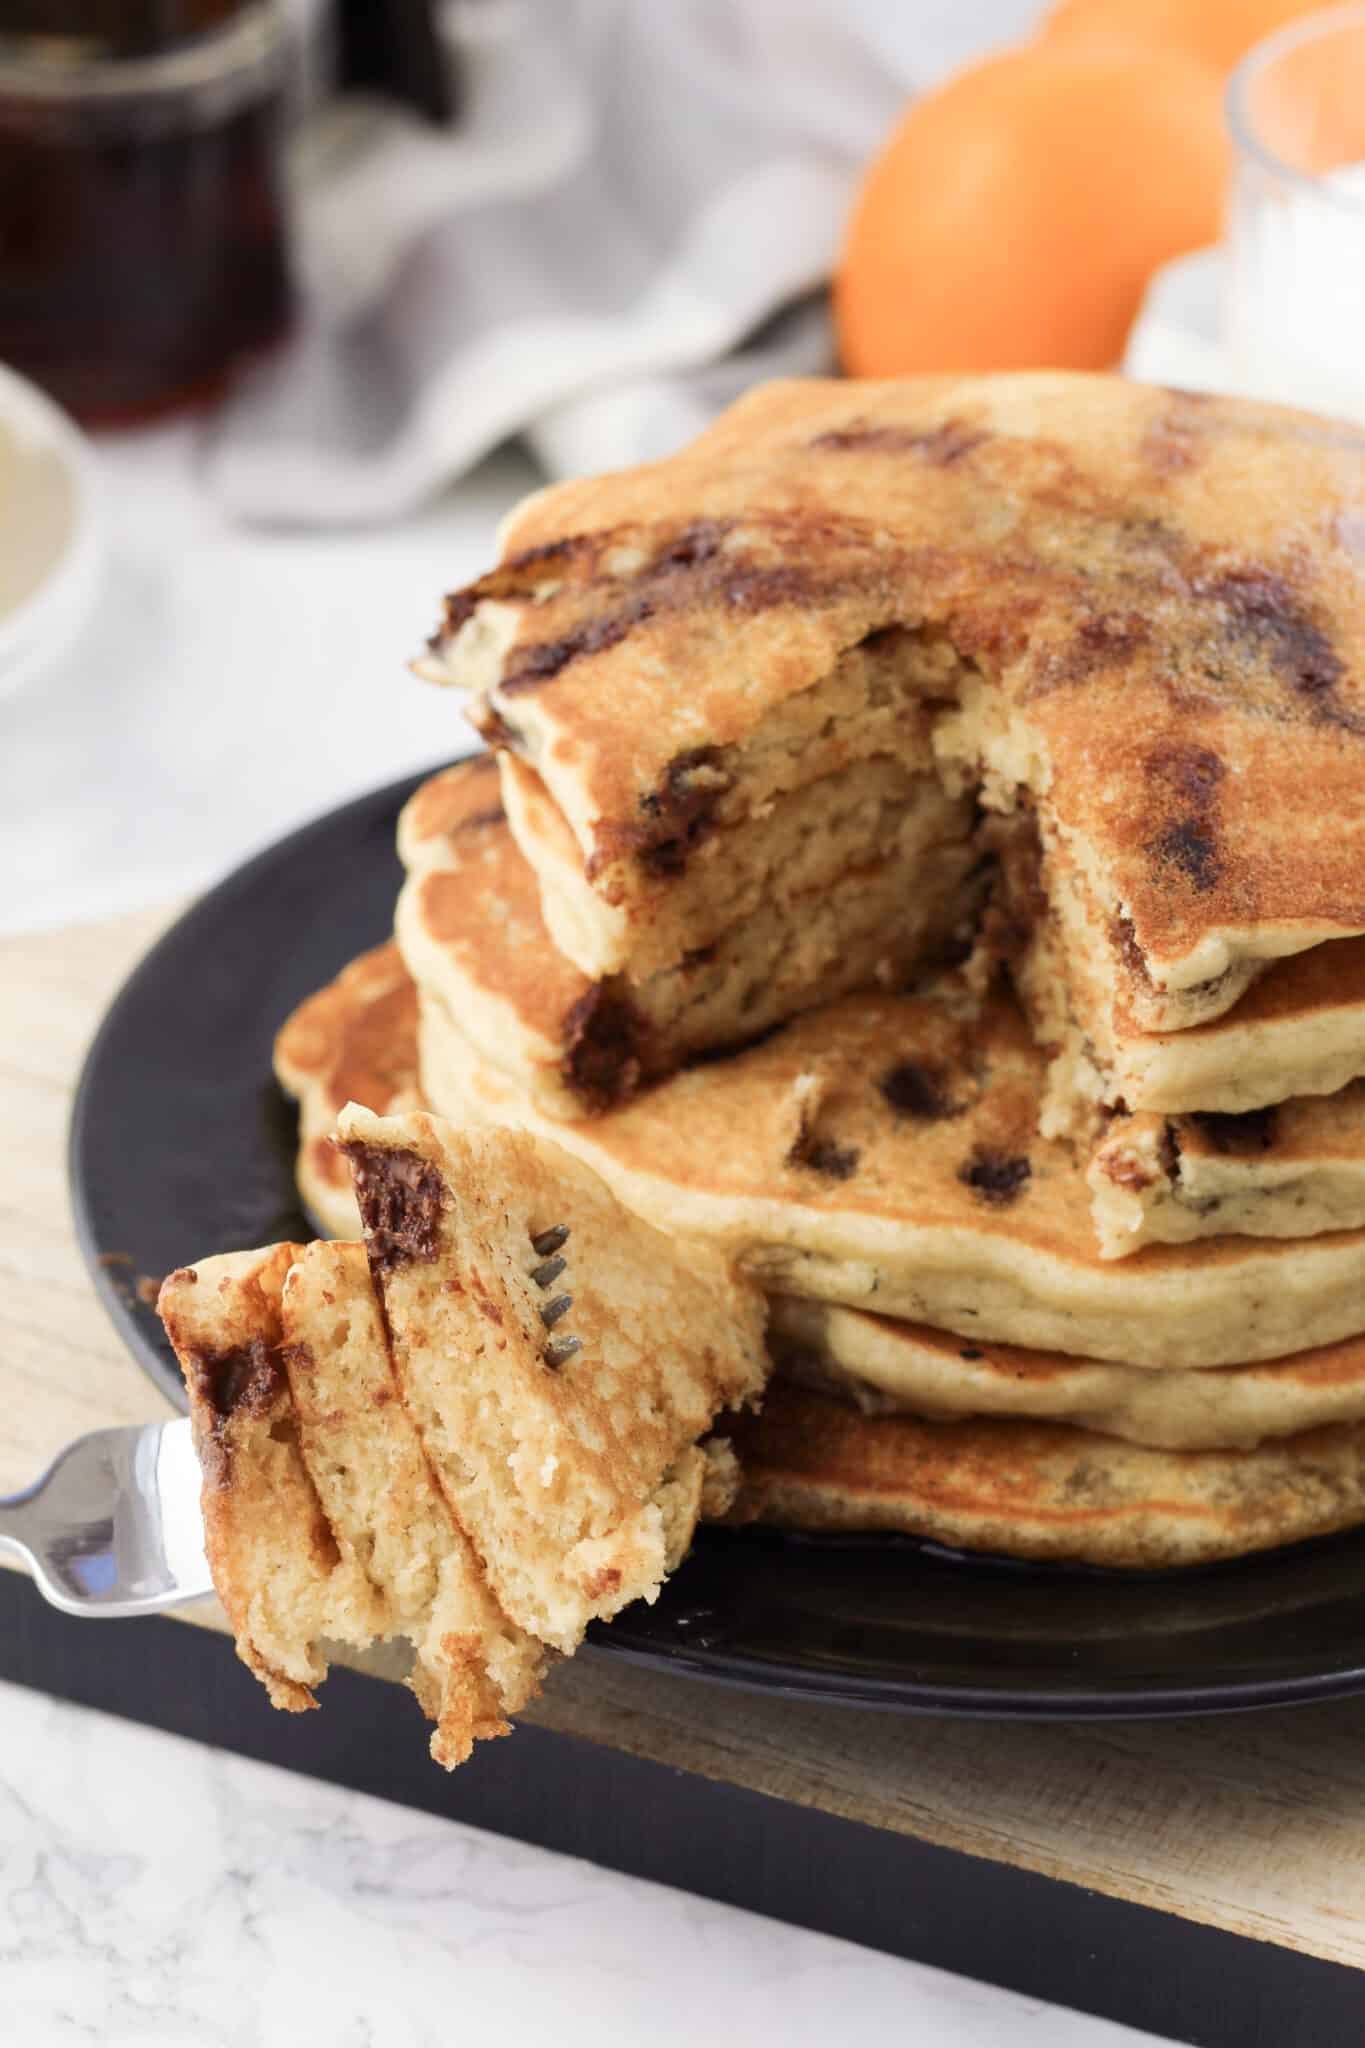 Gluten-free Chocolate Chip Pancakes - Mile High Mitts